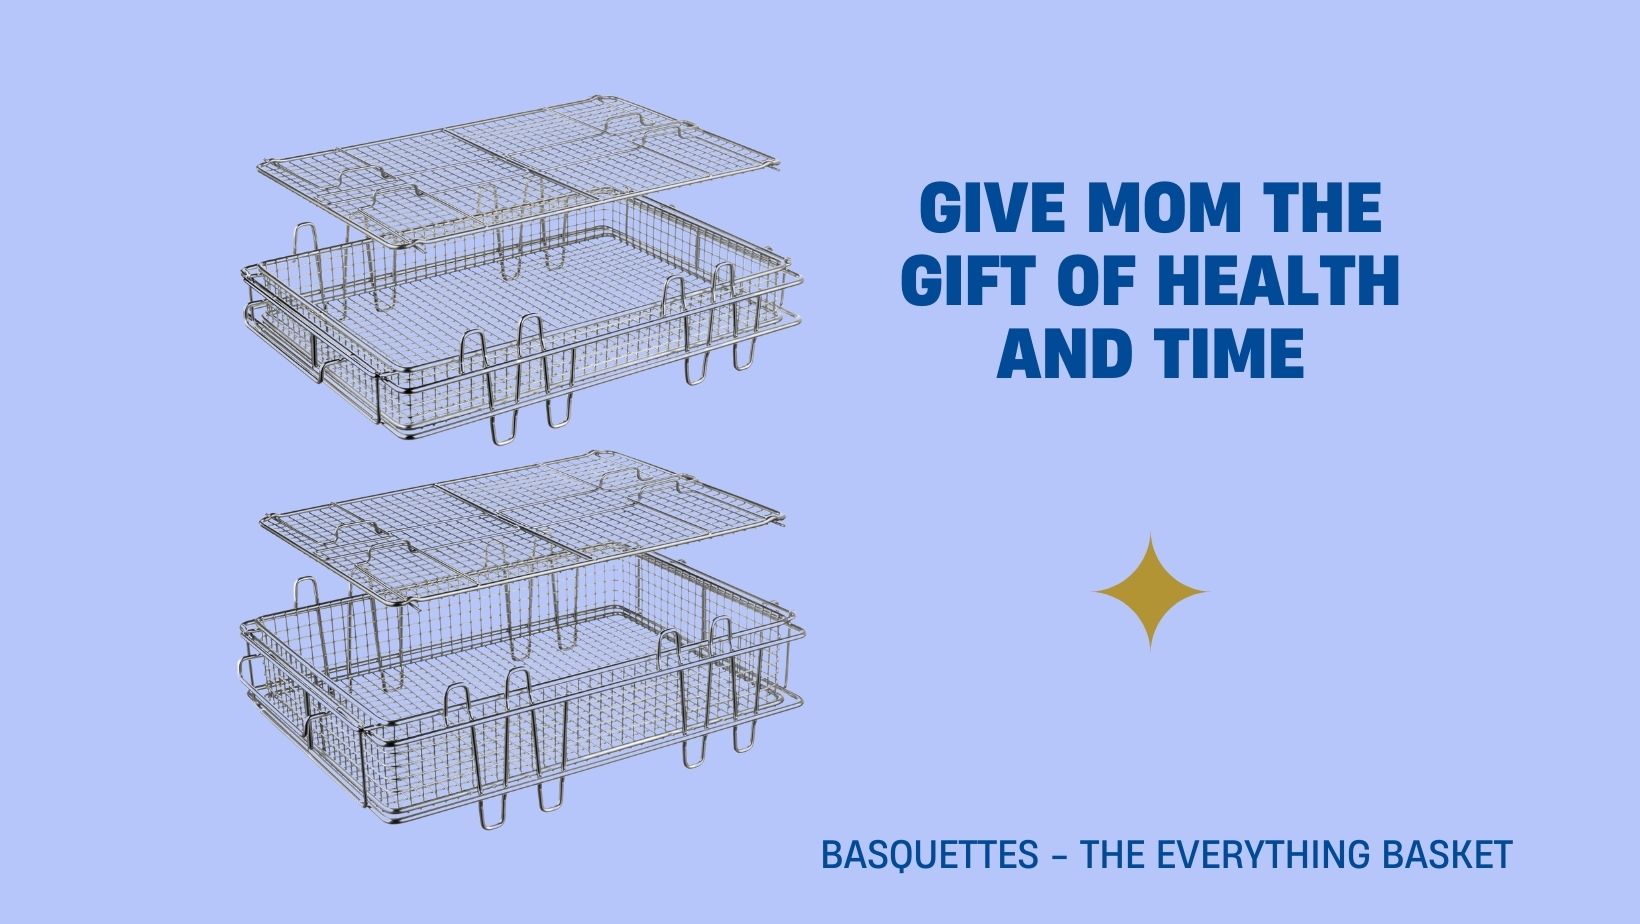 This Mother's Day give mom Basquettes